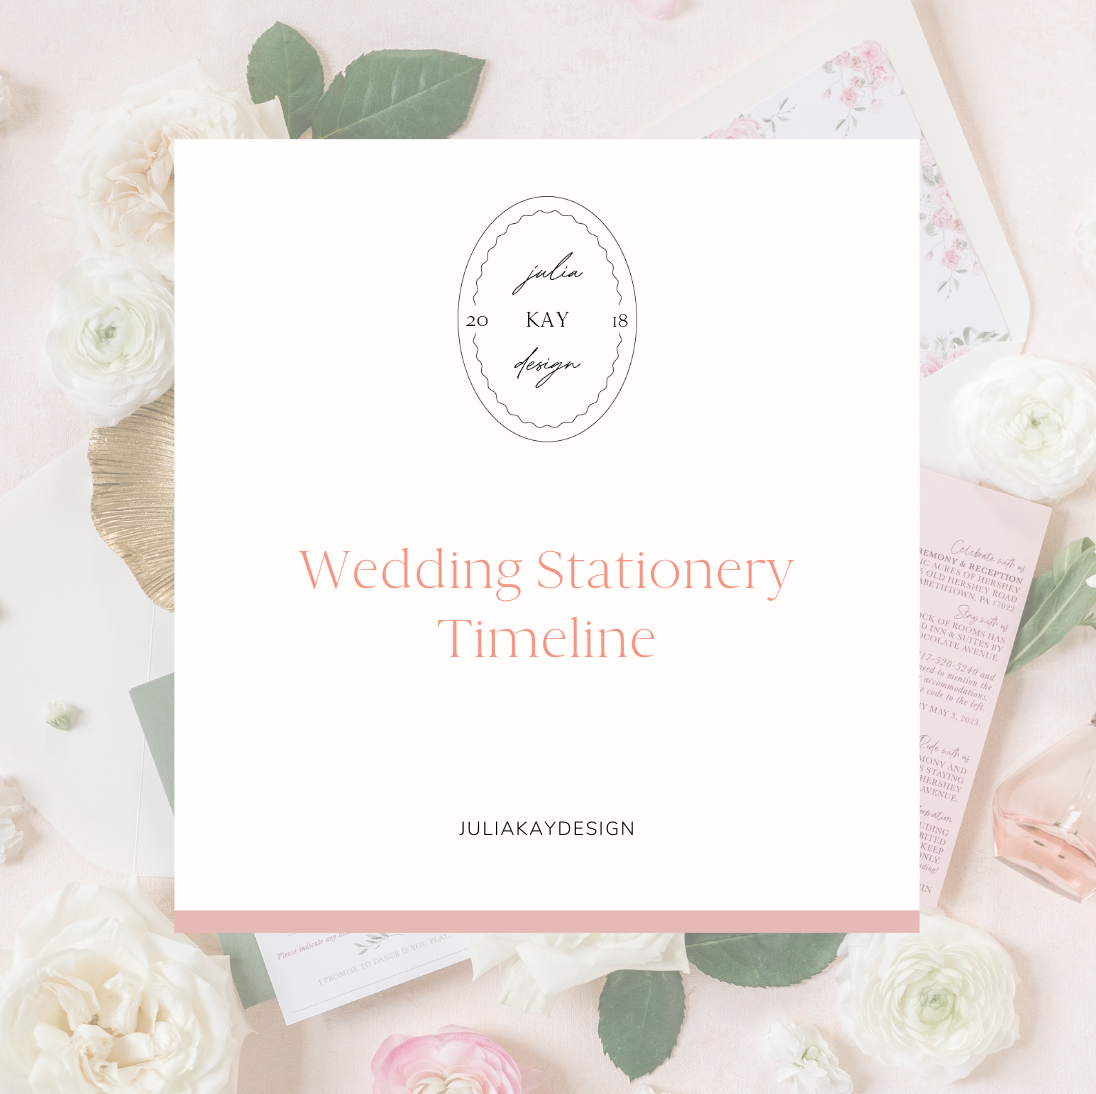 Wedding Stationery Timeline + Day-of Paper Goods List